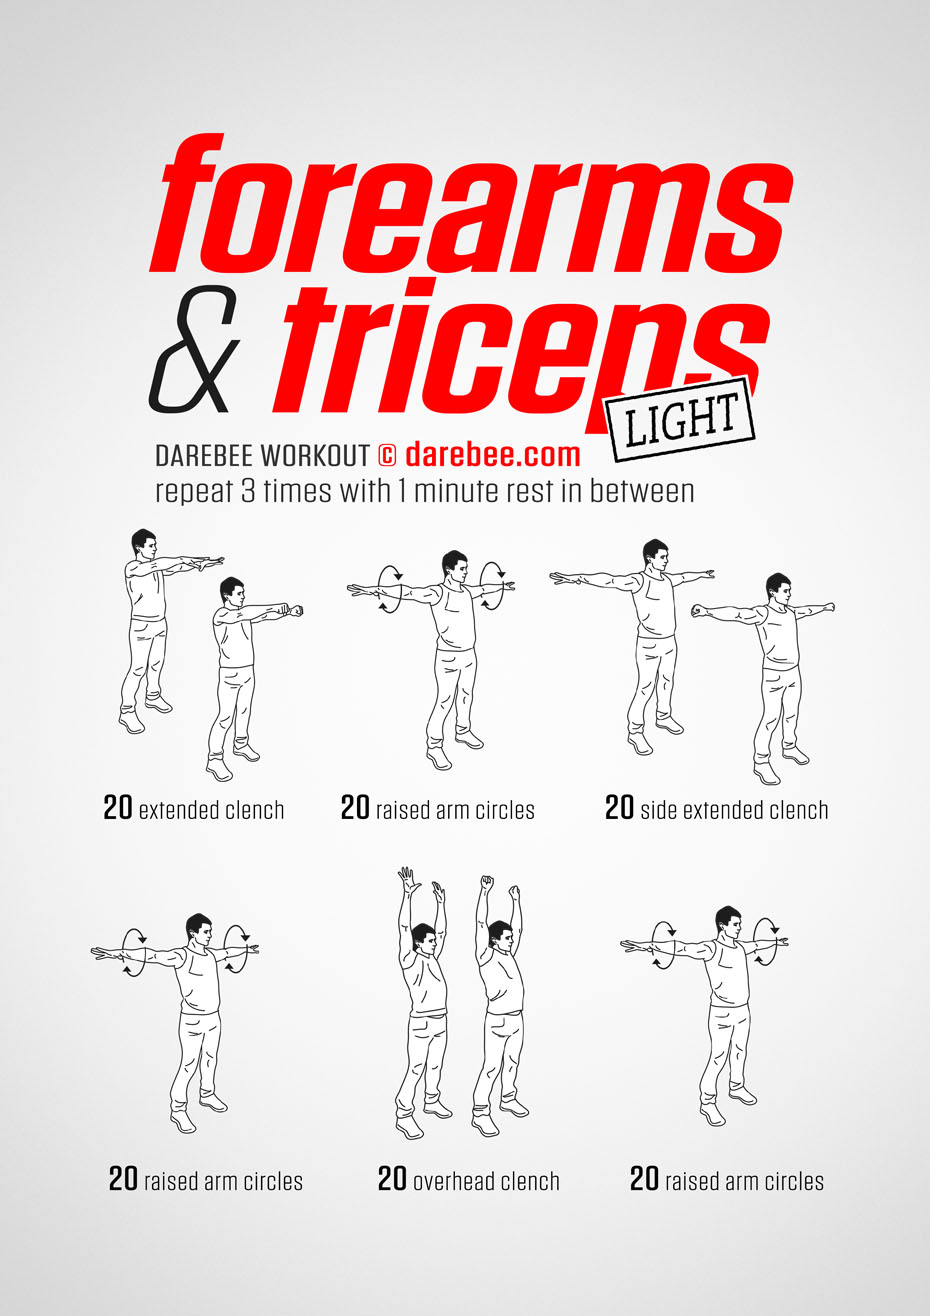 Forearms & Triceps Workout